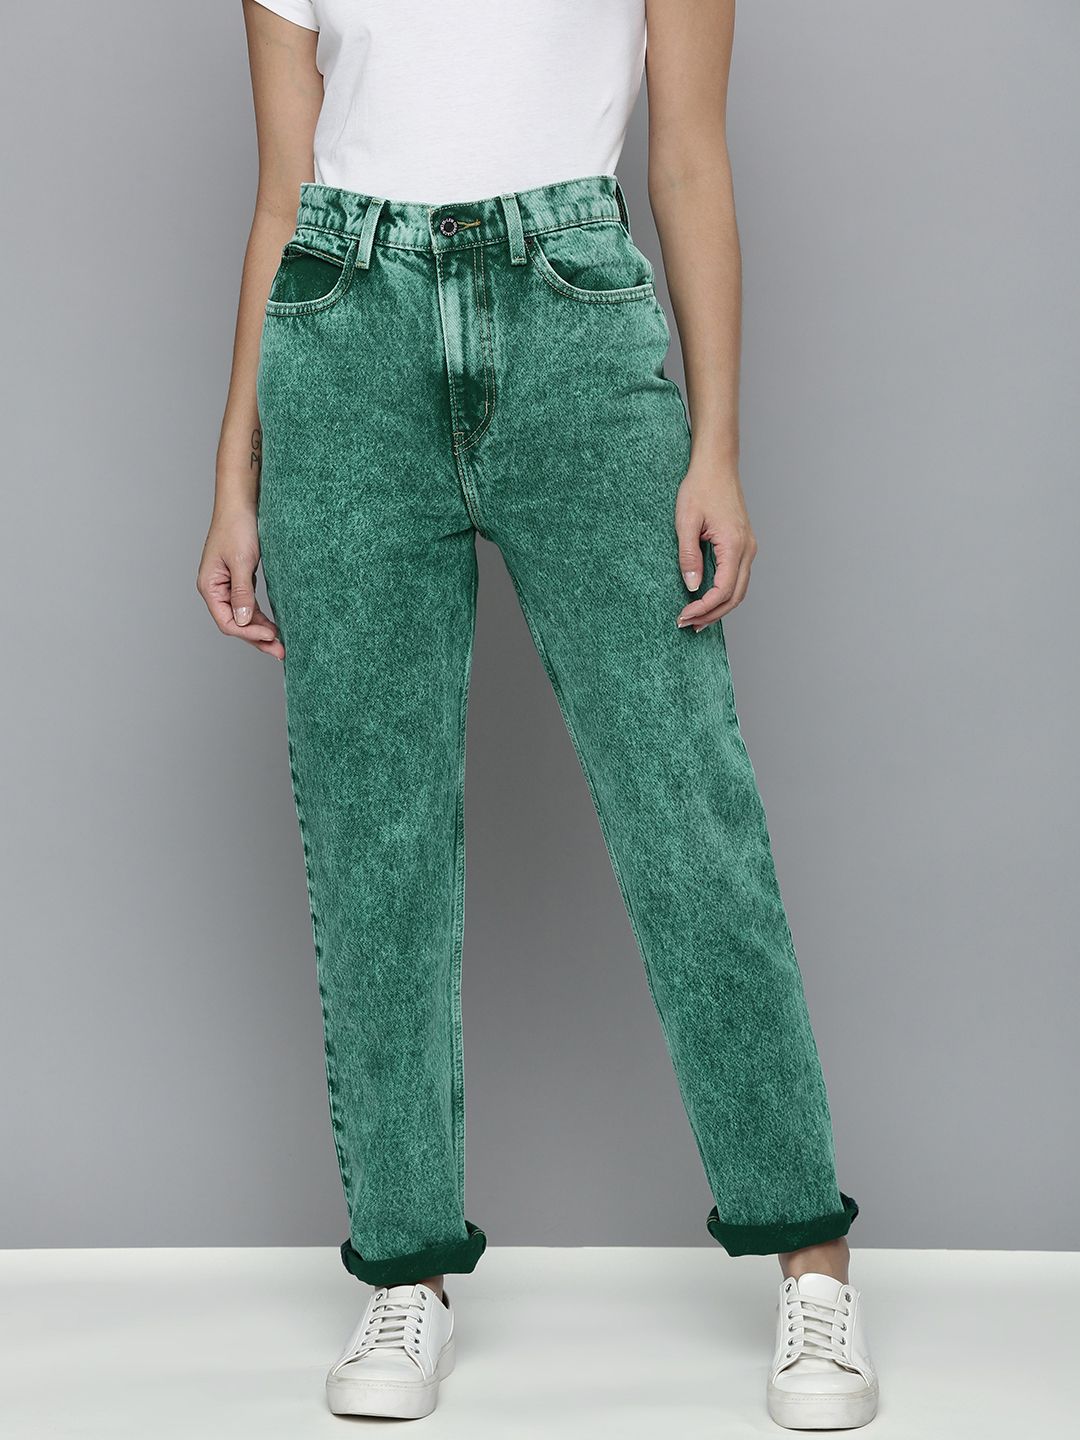 Levis X Deepika Padukone Women Green Straight Fit High-Rise Light Fade Jeans Price in India